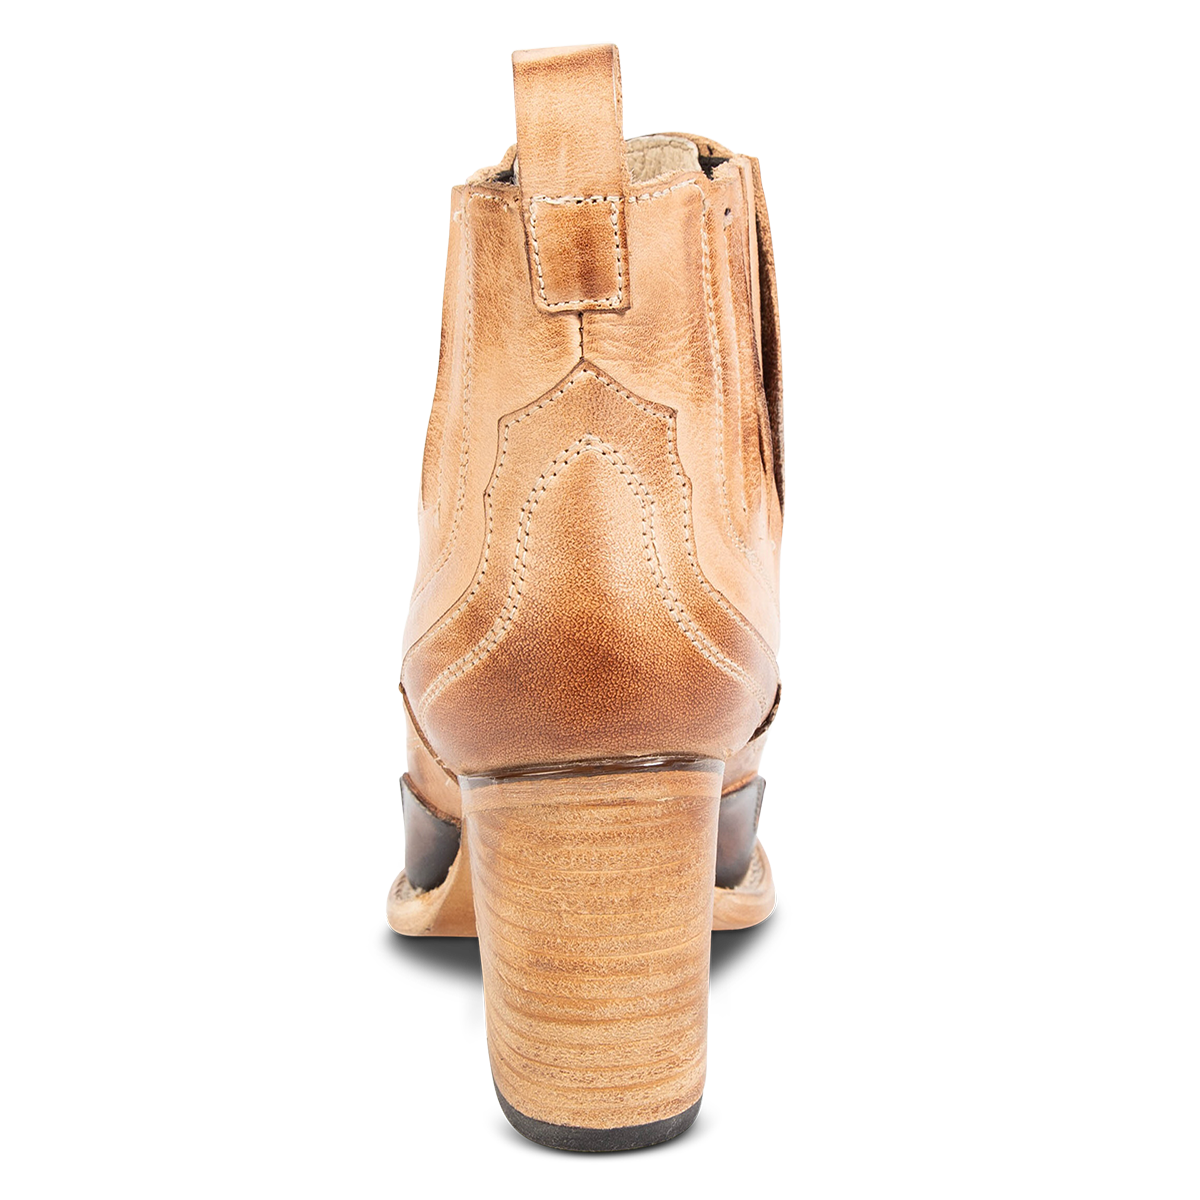 Back view showing FREEBIRD women's Paula beige multi contrast leather overlay bootie with gore detailing, stacked heel and heel leather pull tab